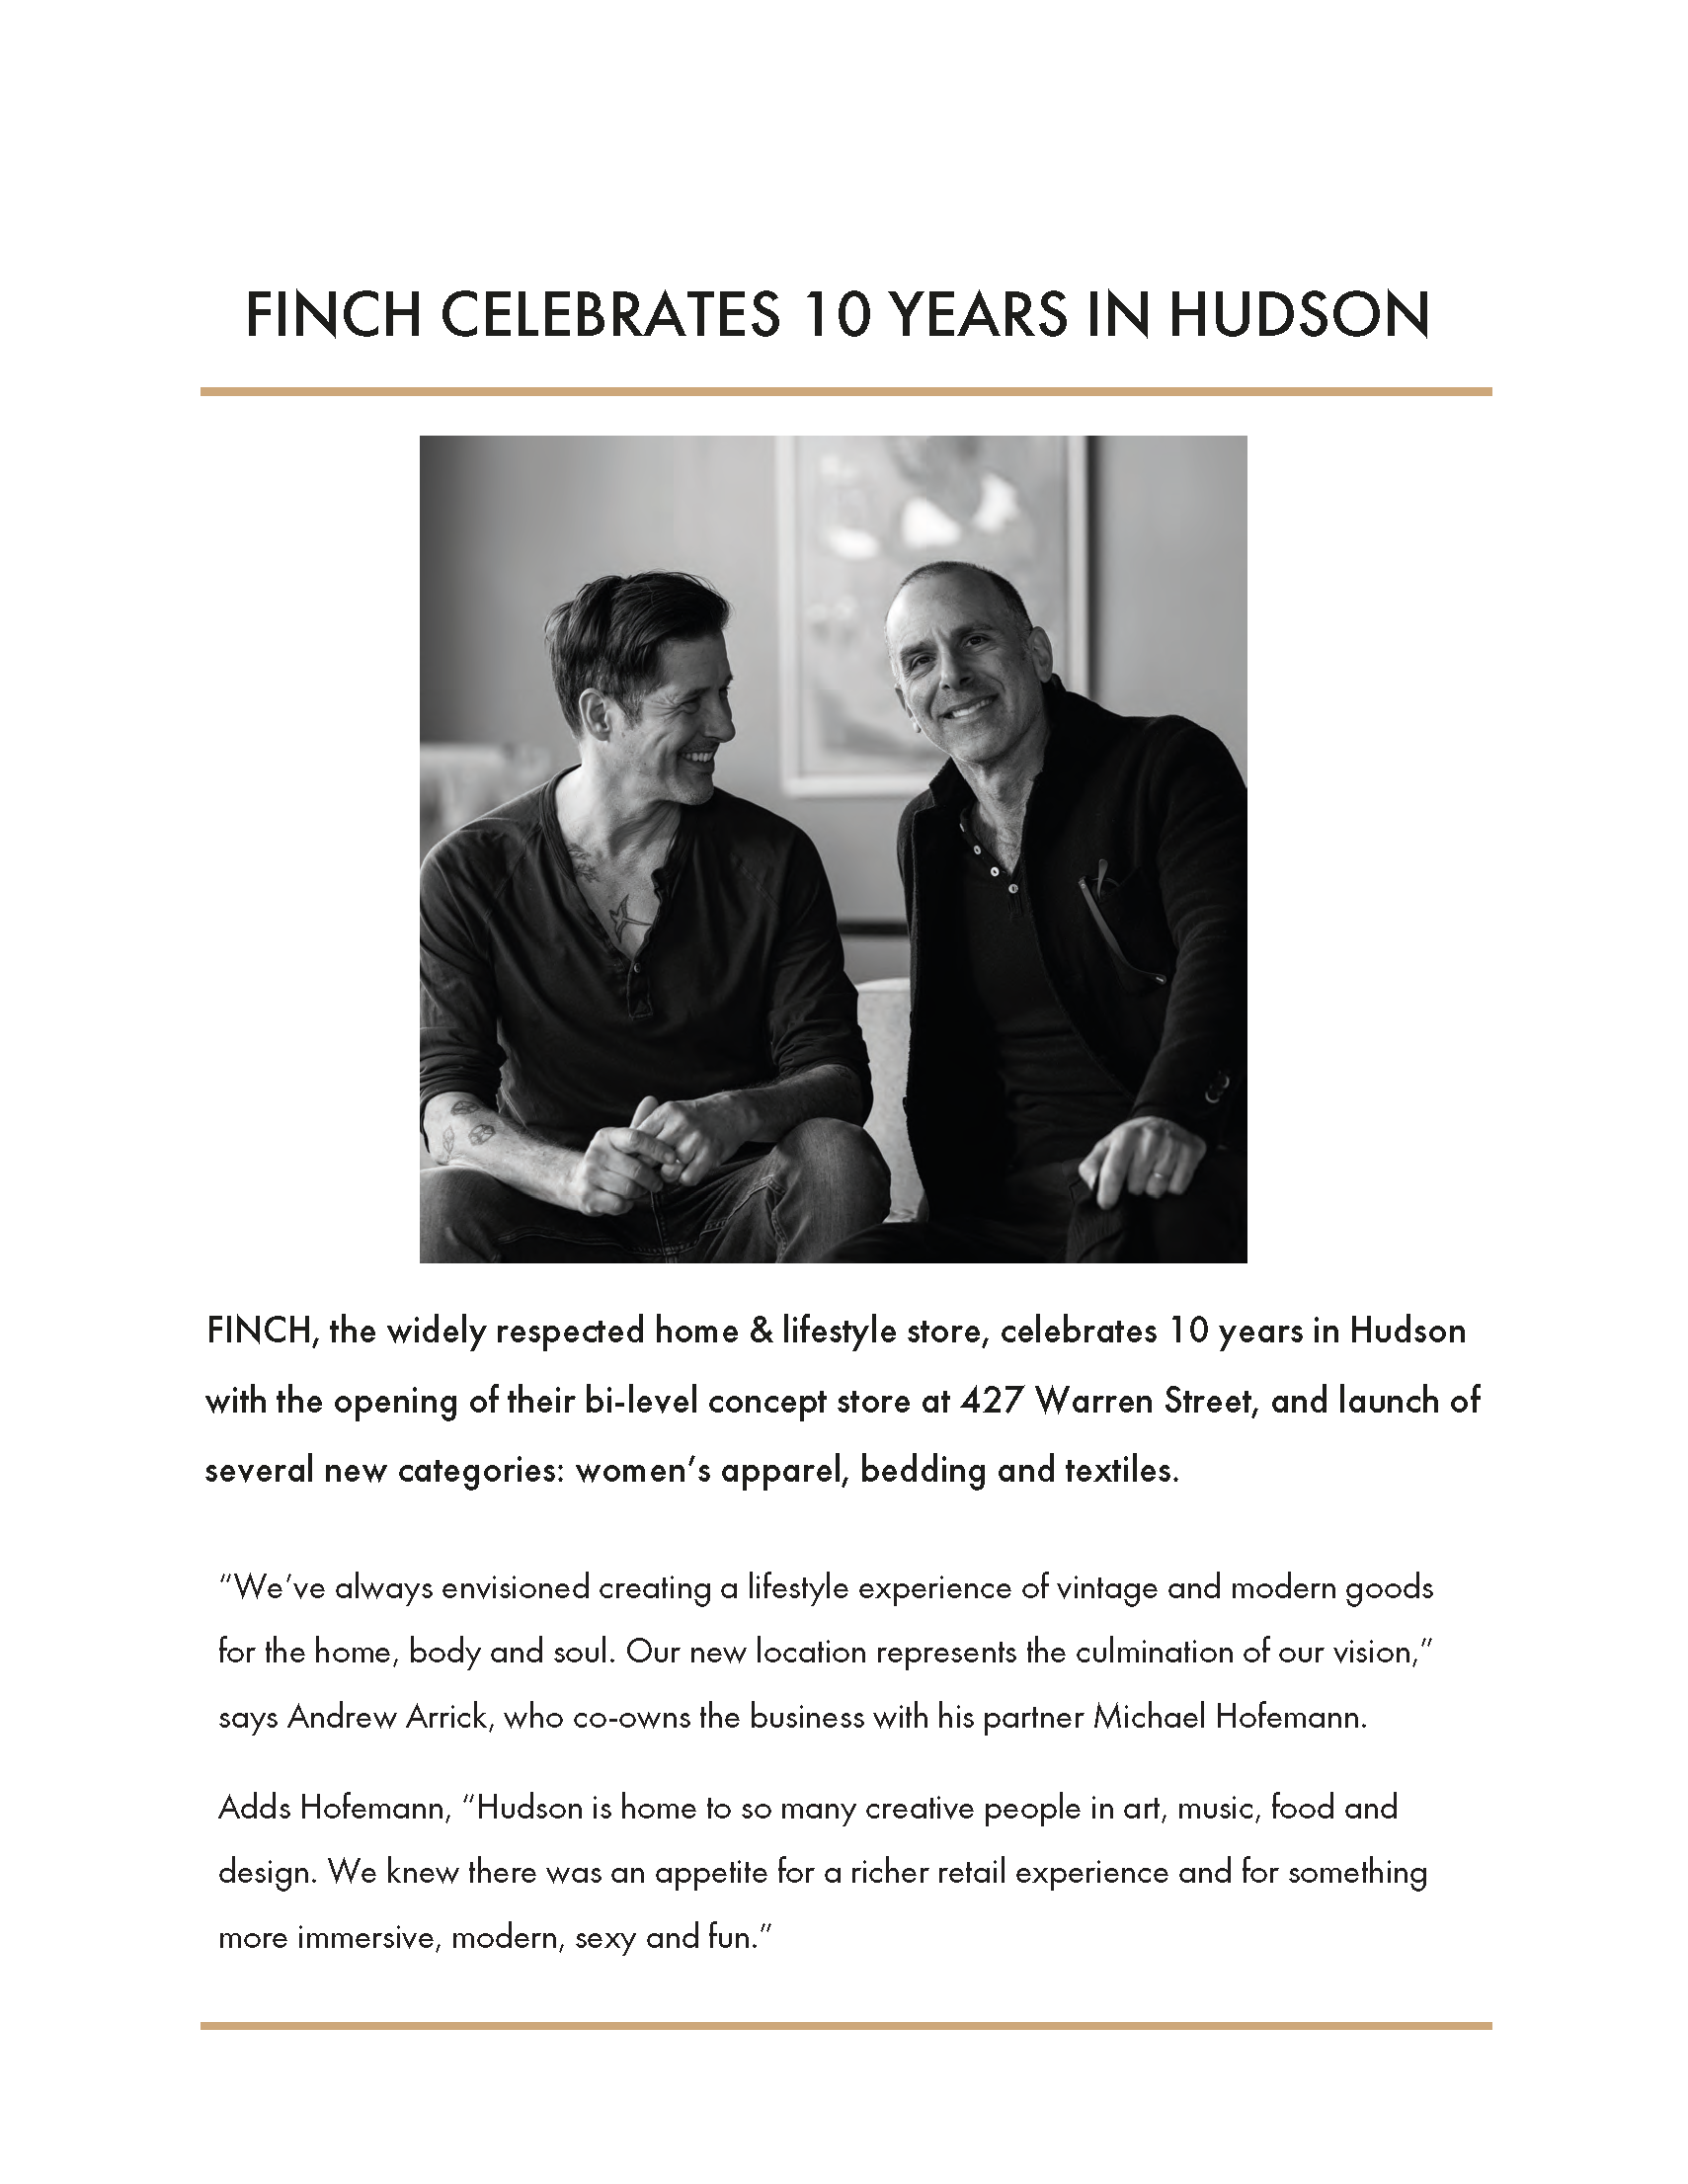 FINCH hudson 10th Anniversary Press Release - Page 1